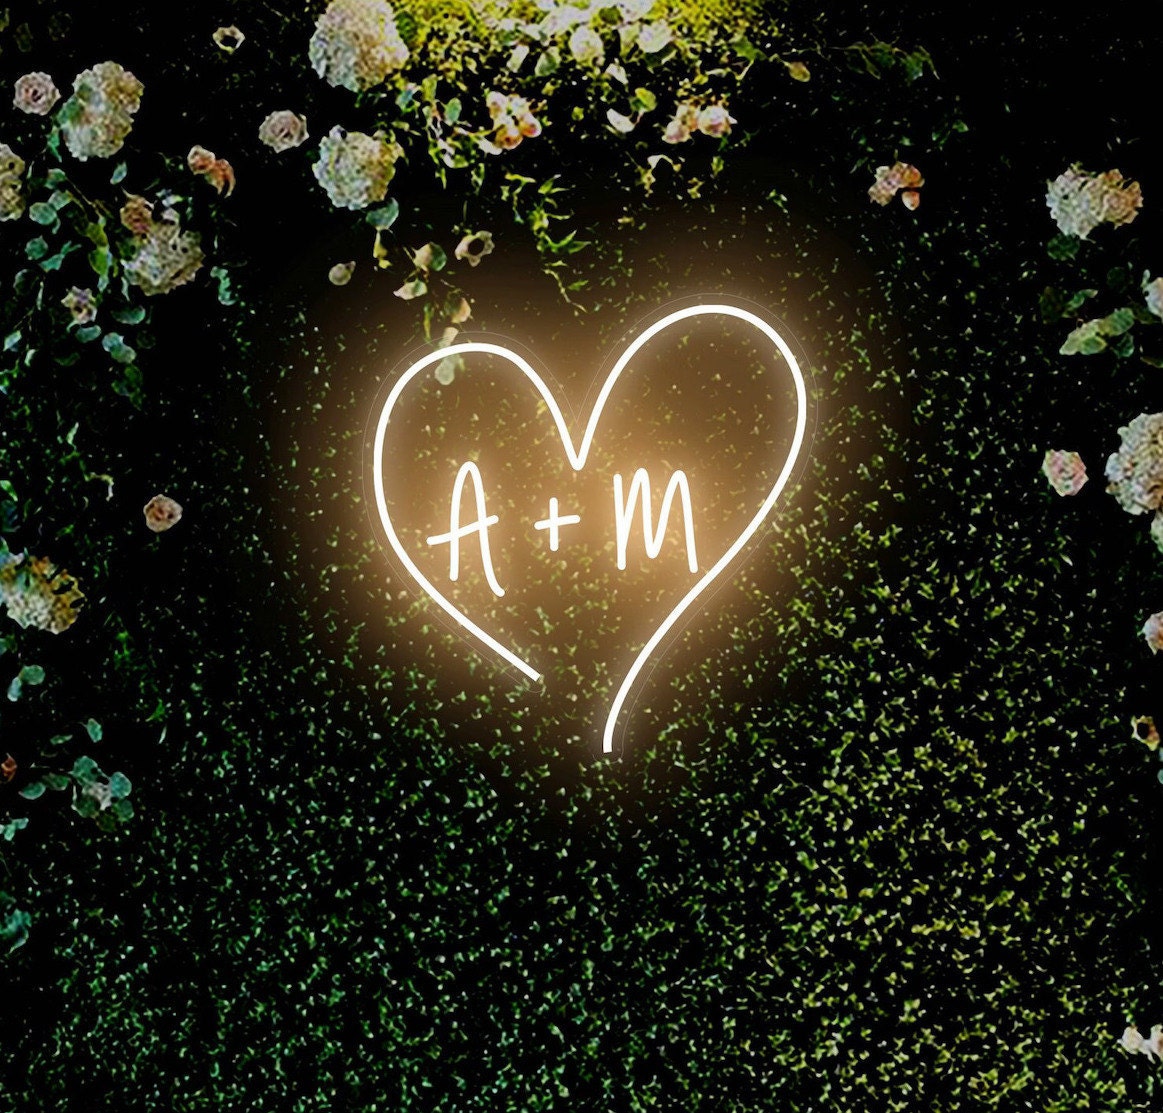 Heart-shaped neon wedding sign from Etsy